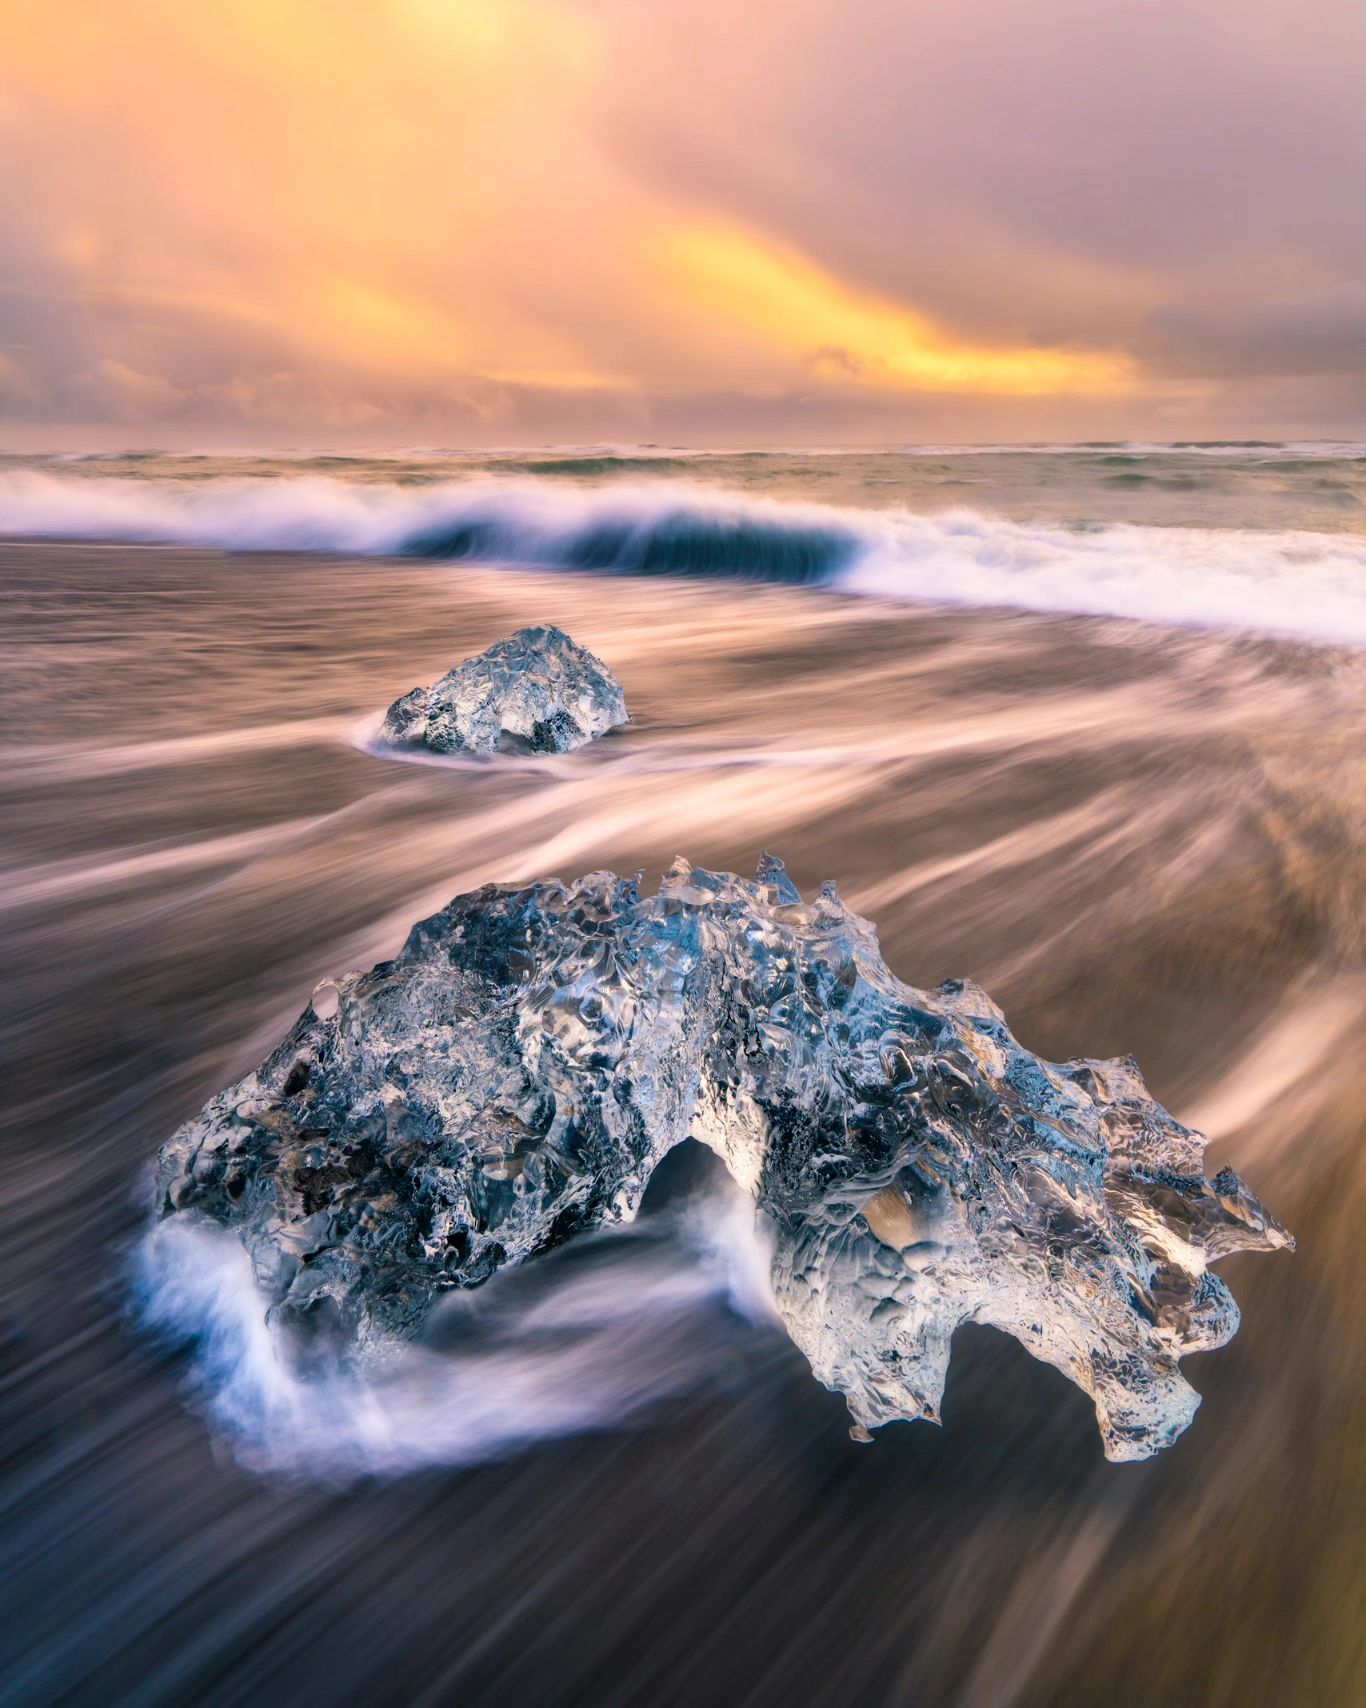 Early morning sunrise along Diamond Beach in Iceland doesn't always work out weather wise, but when the light is right, it is one of the most magical spots in the country!

Sony a7R II w/ 16-35 f/4
#sonyambassador